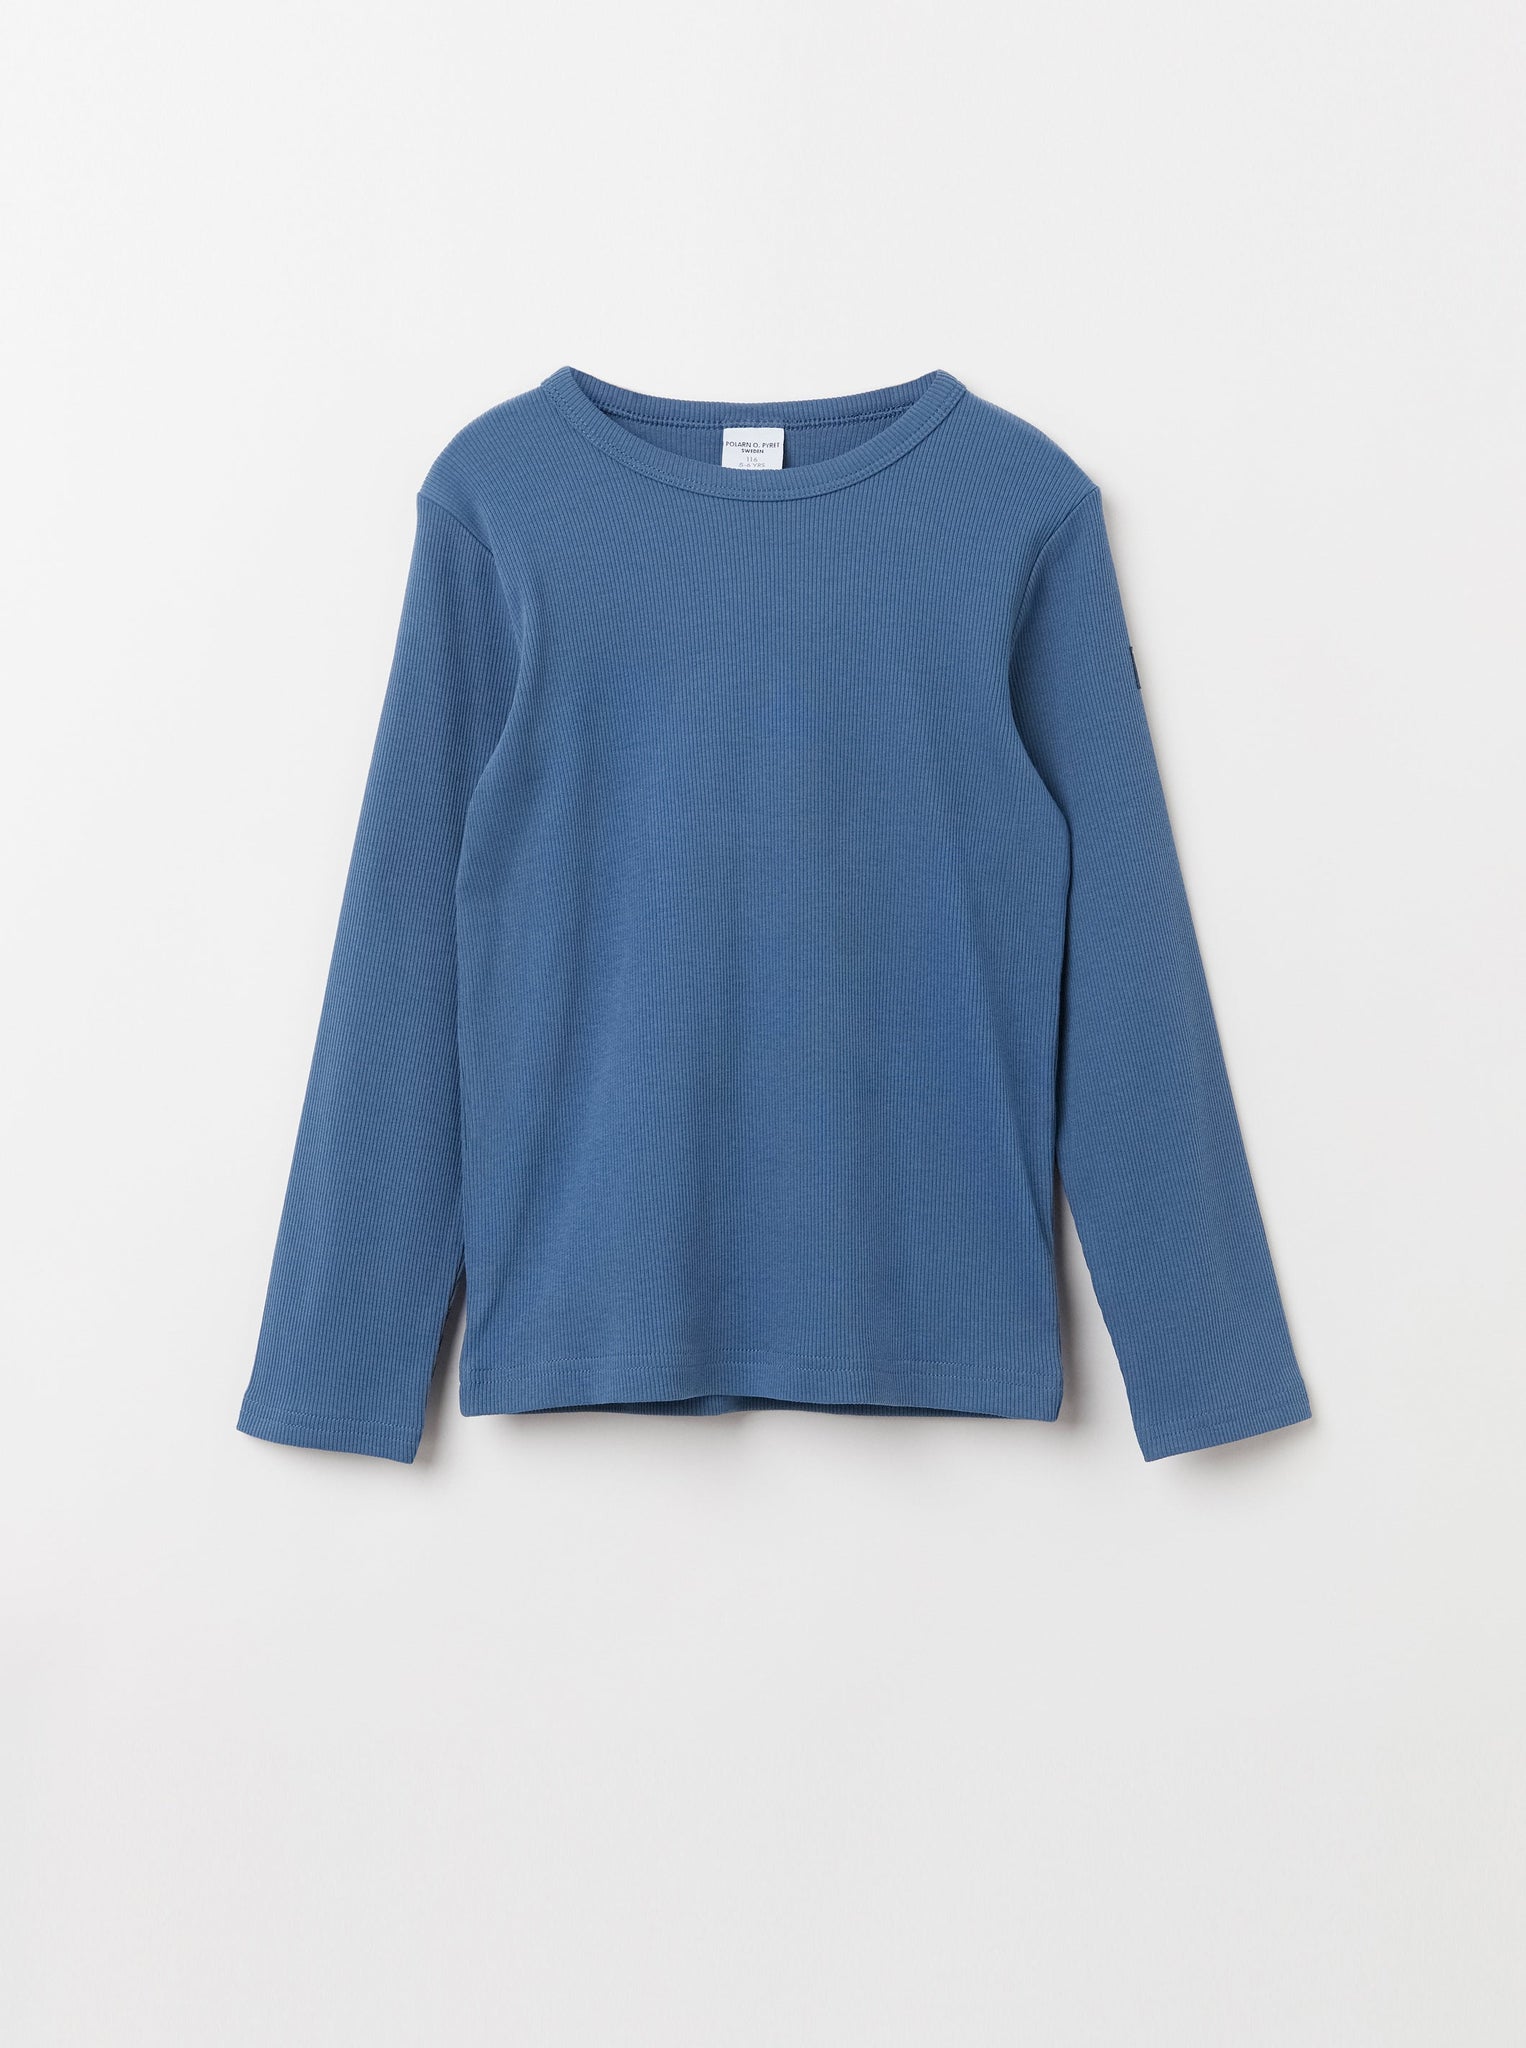 Blue Ribbed Kids Top from the Polarn O. Pyret Kidswear collection. Ethically produced kids clothing.